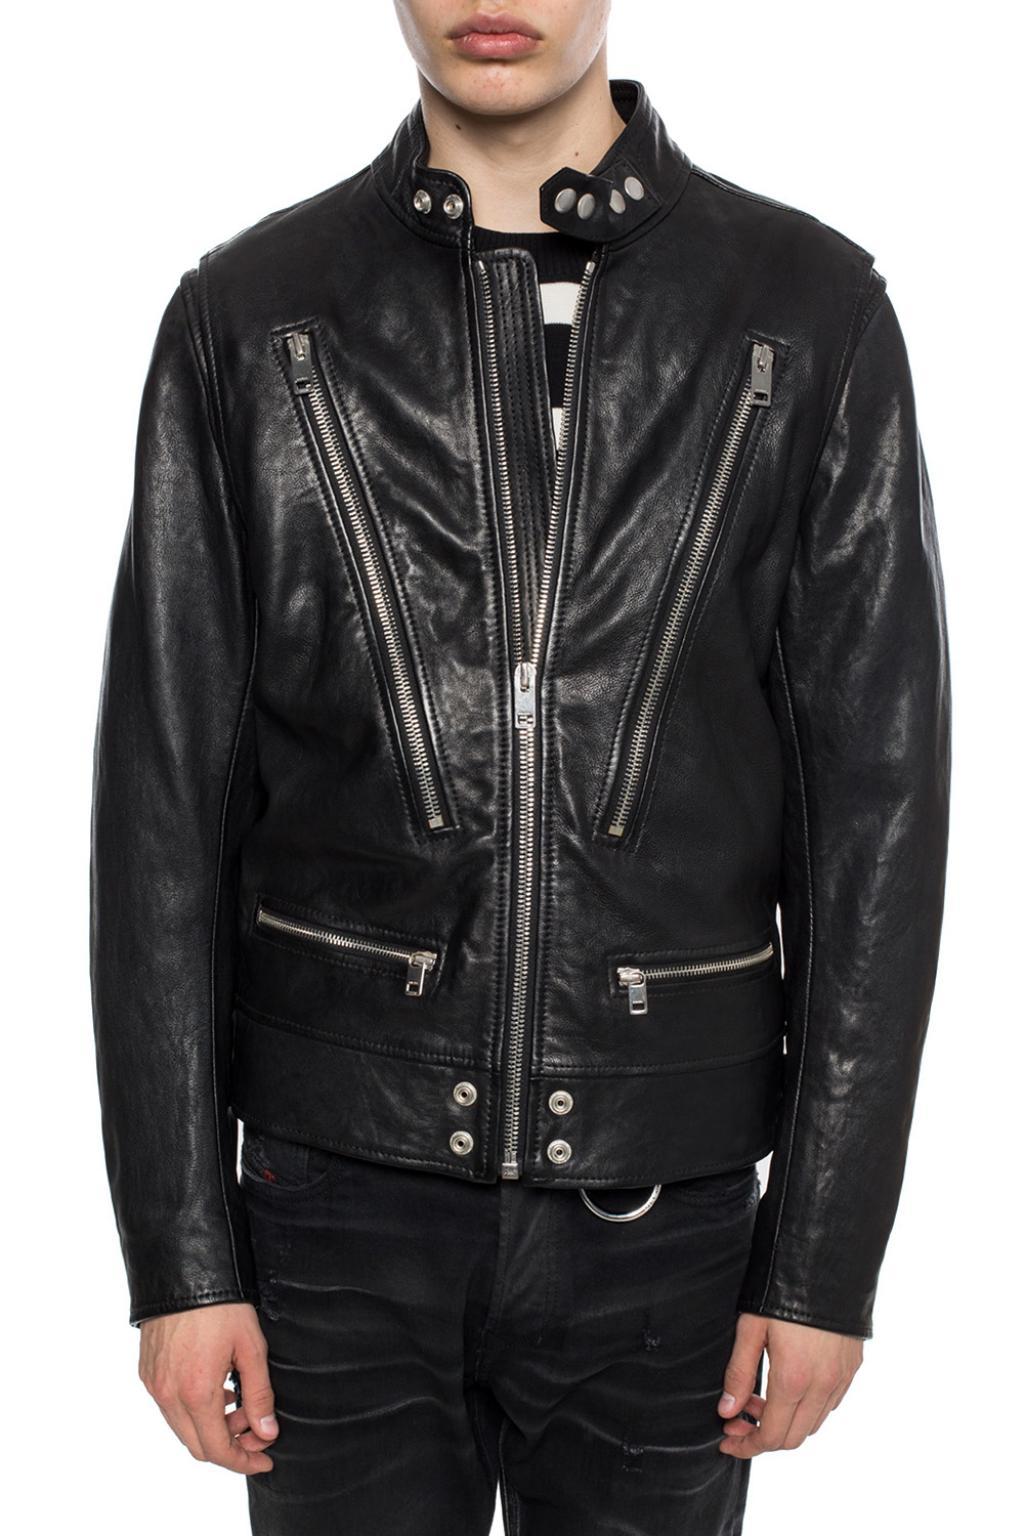 DIESEL Leather Jacket With Pockets in Black for Men - Lyst